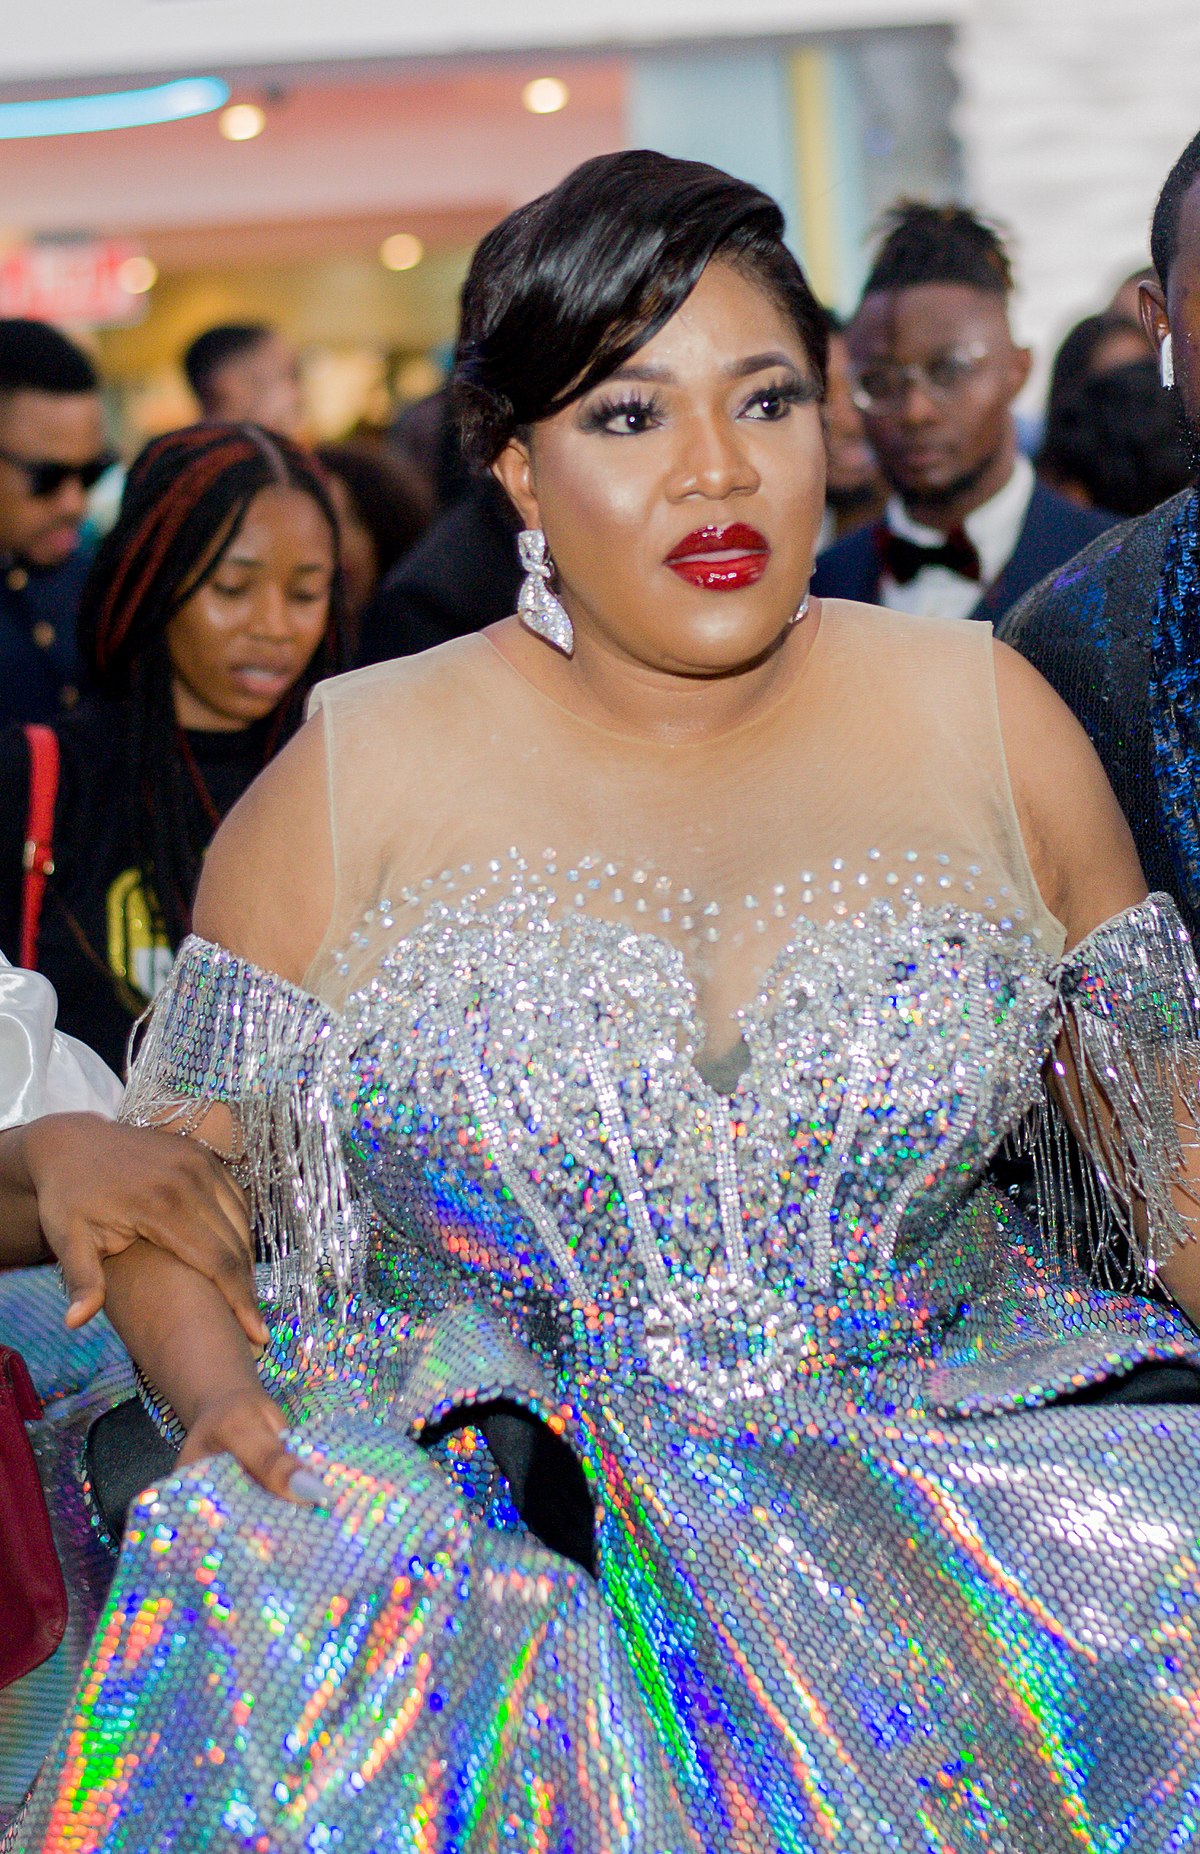 Toyin Abraham explains the reasons behind the negative reviews received by "Ijakumo".